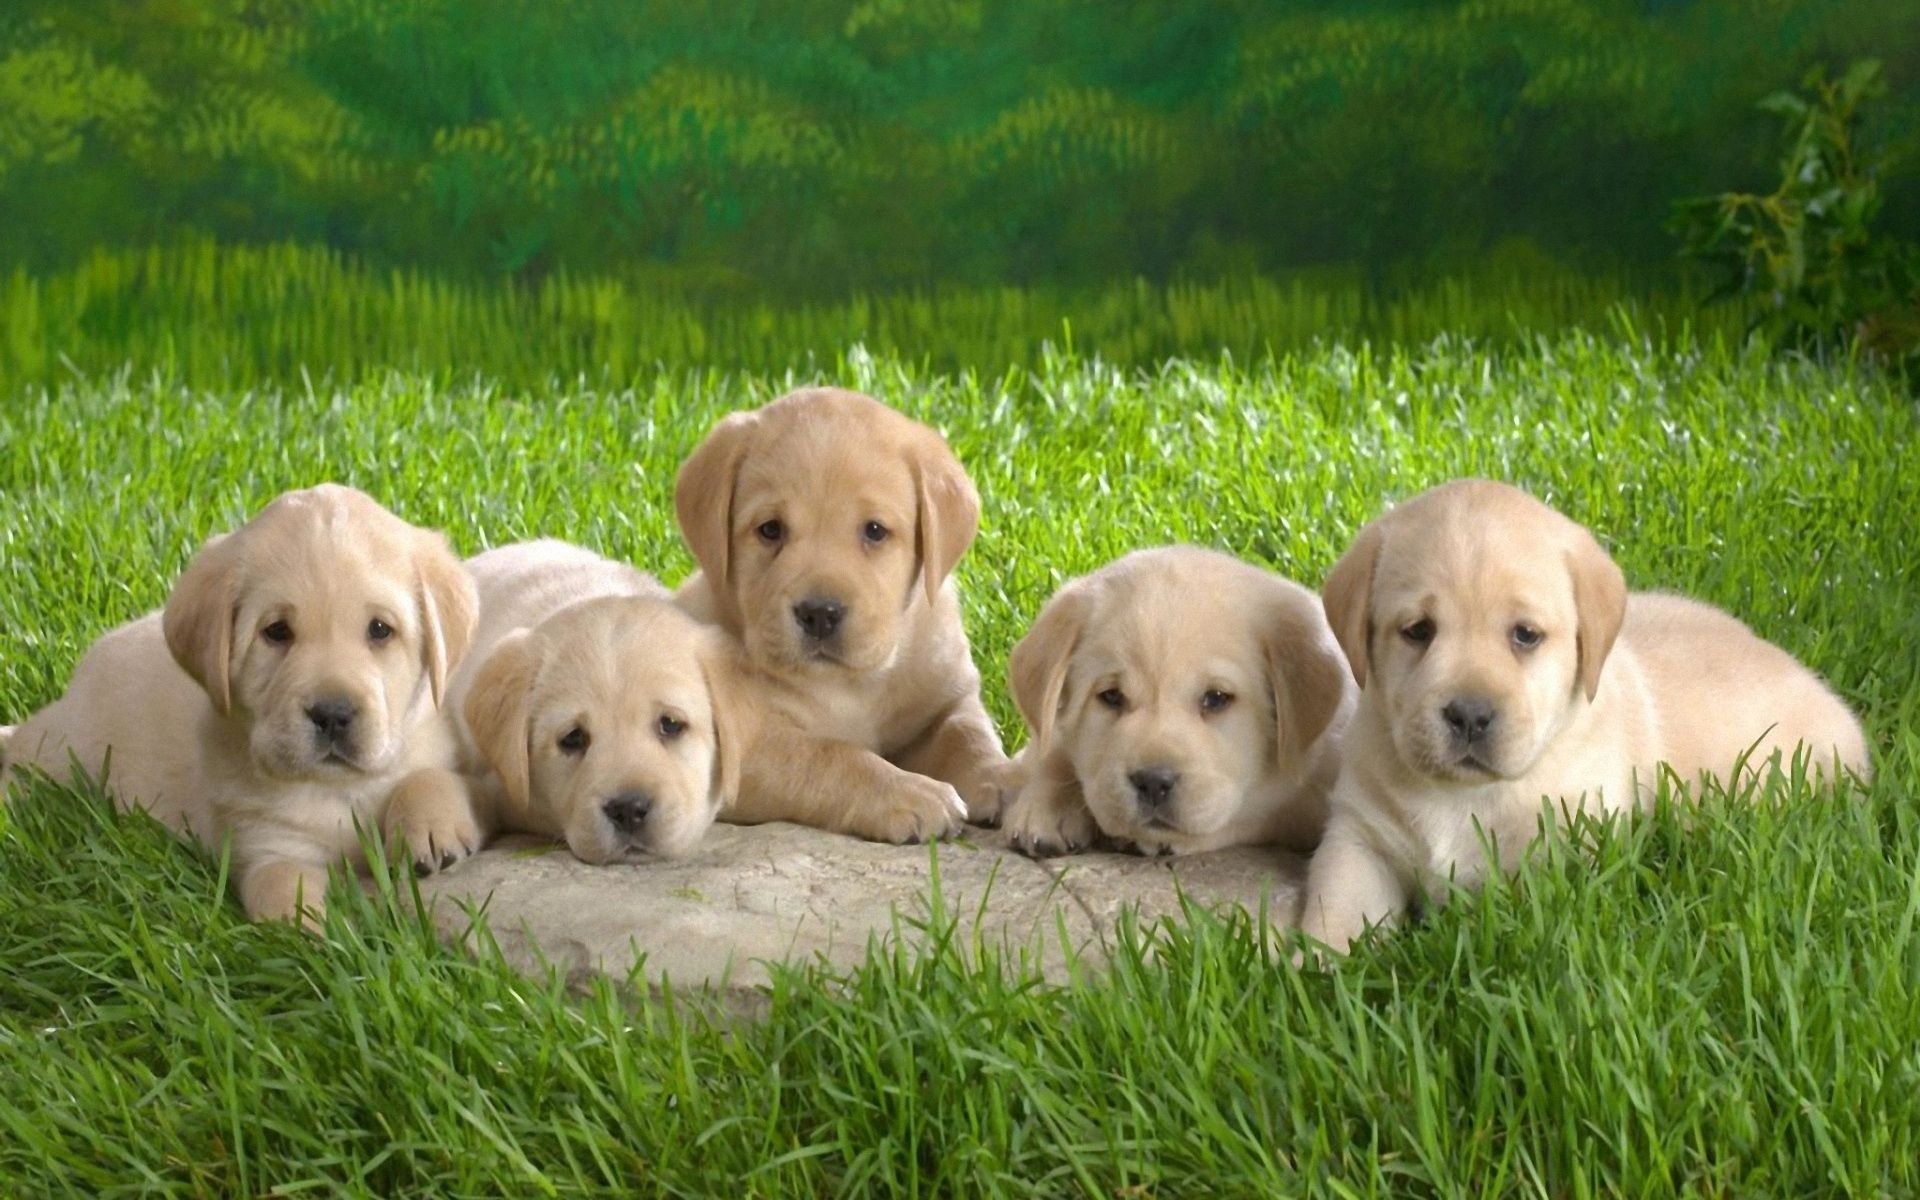 animals, grass, to lie down, lie, labradors, puppies, lots of, multitude